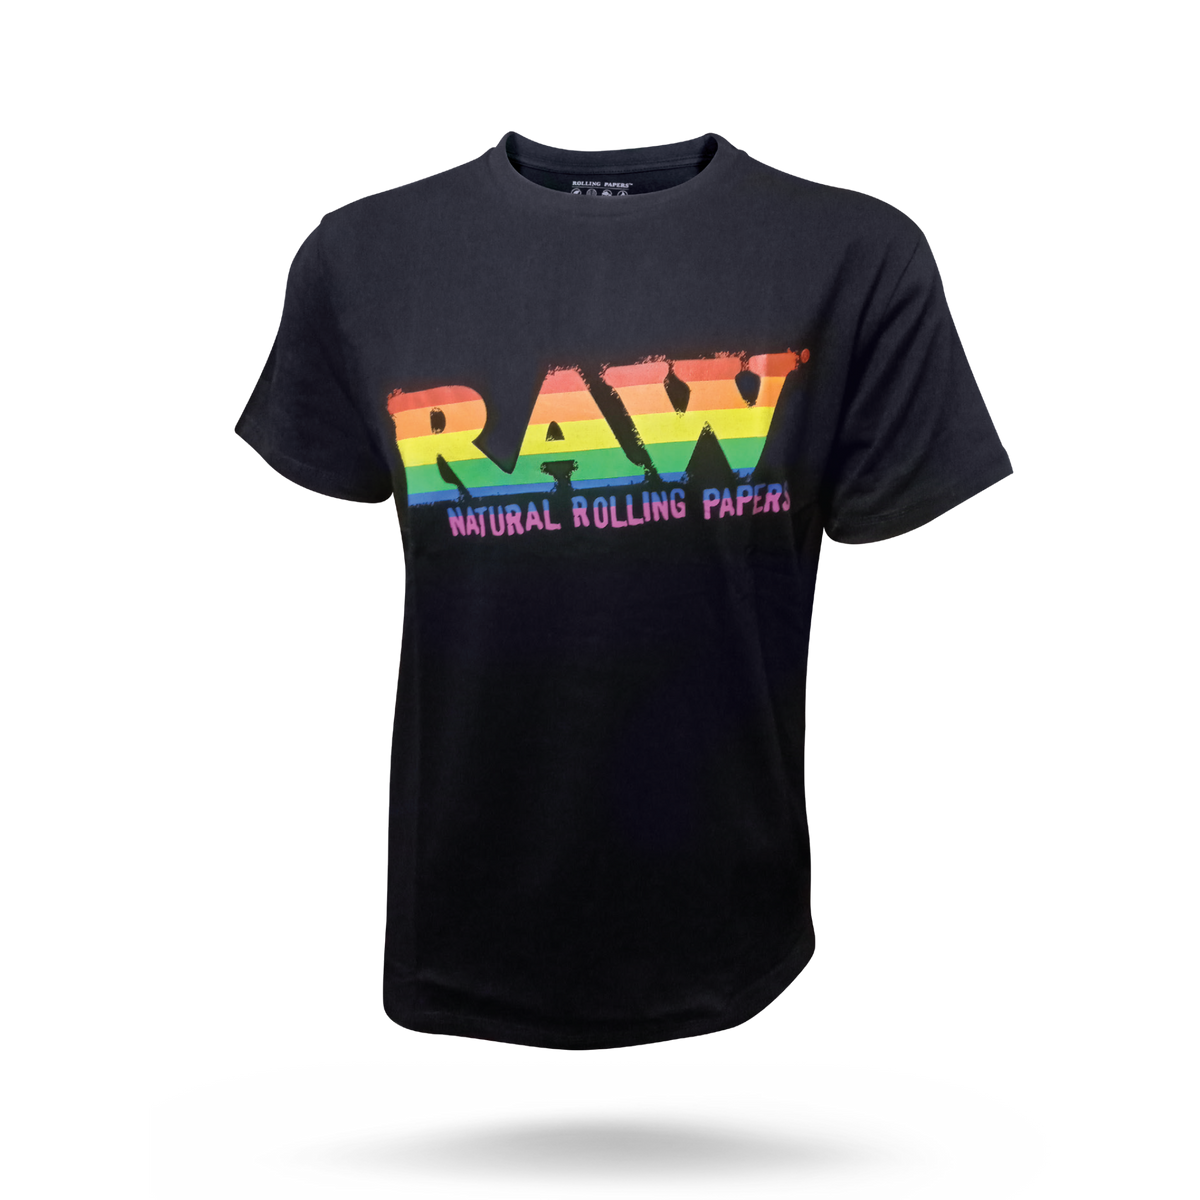 RAW Logo T-Shirt | Pride Clothing Accessories esd-official